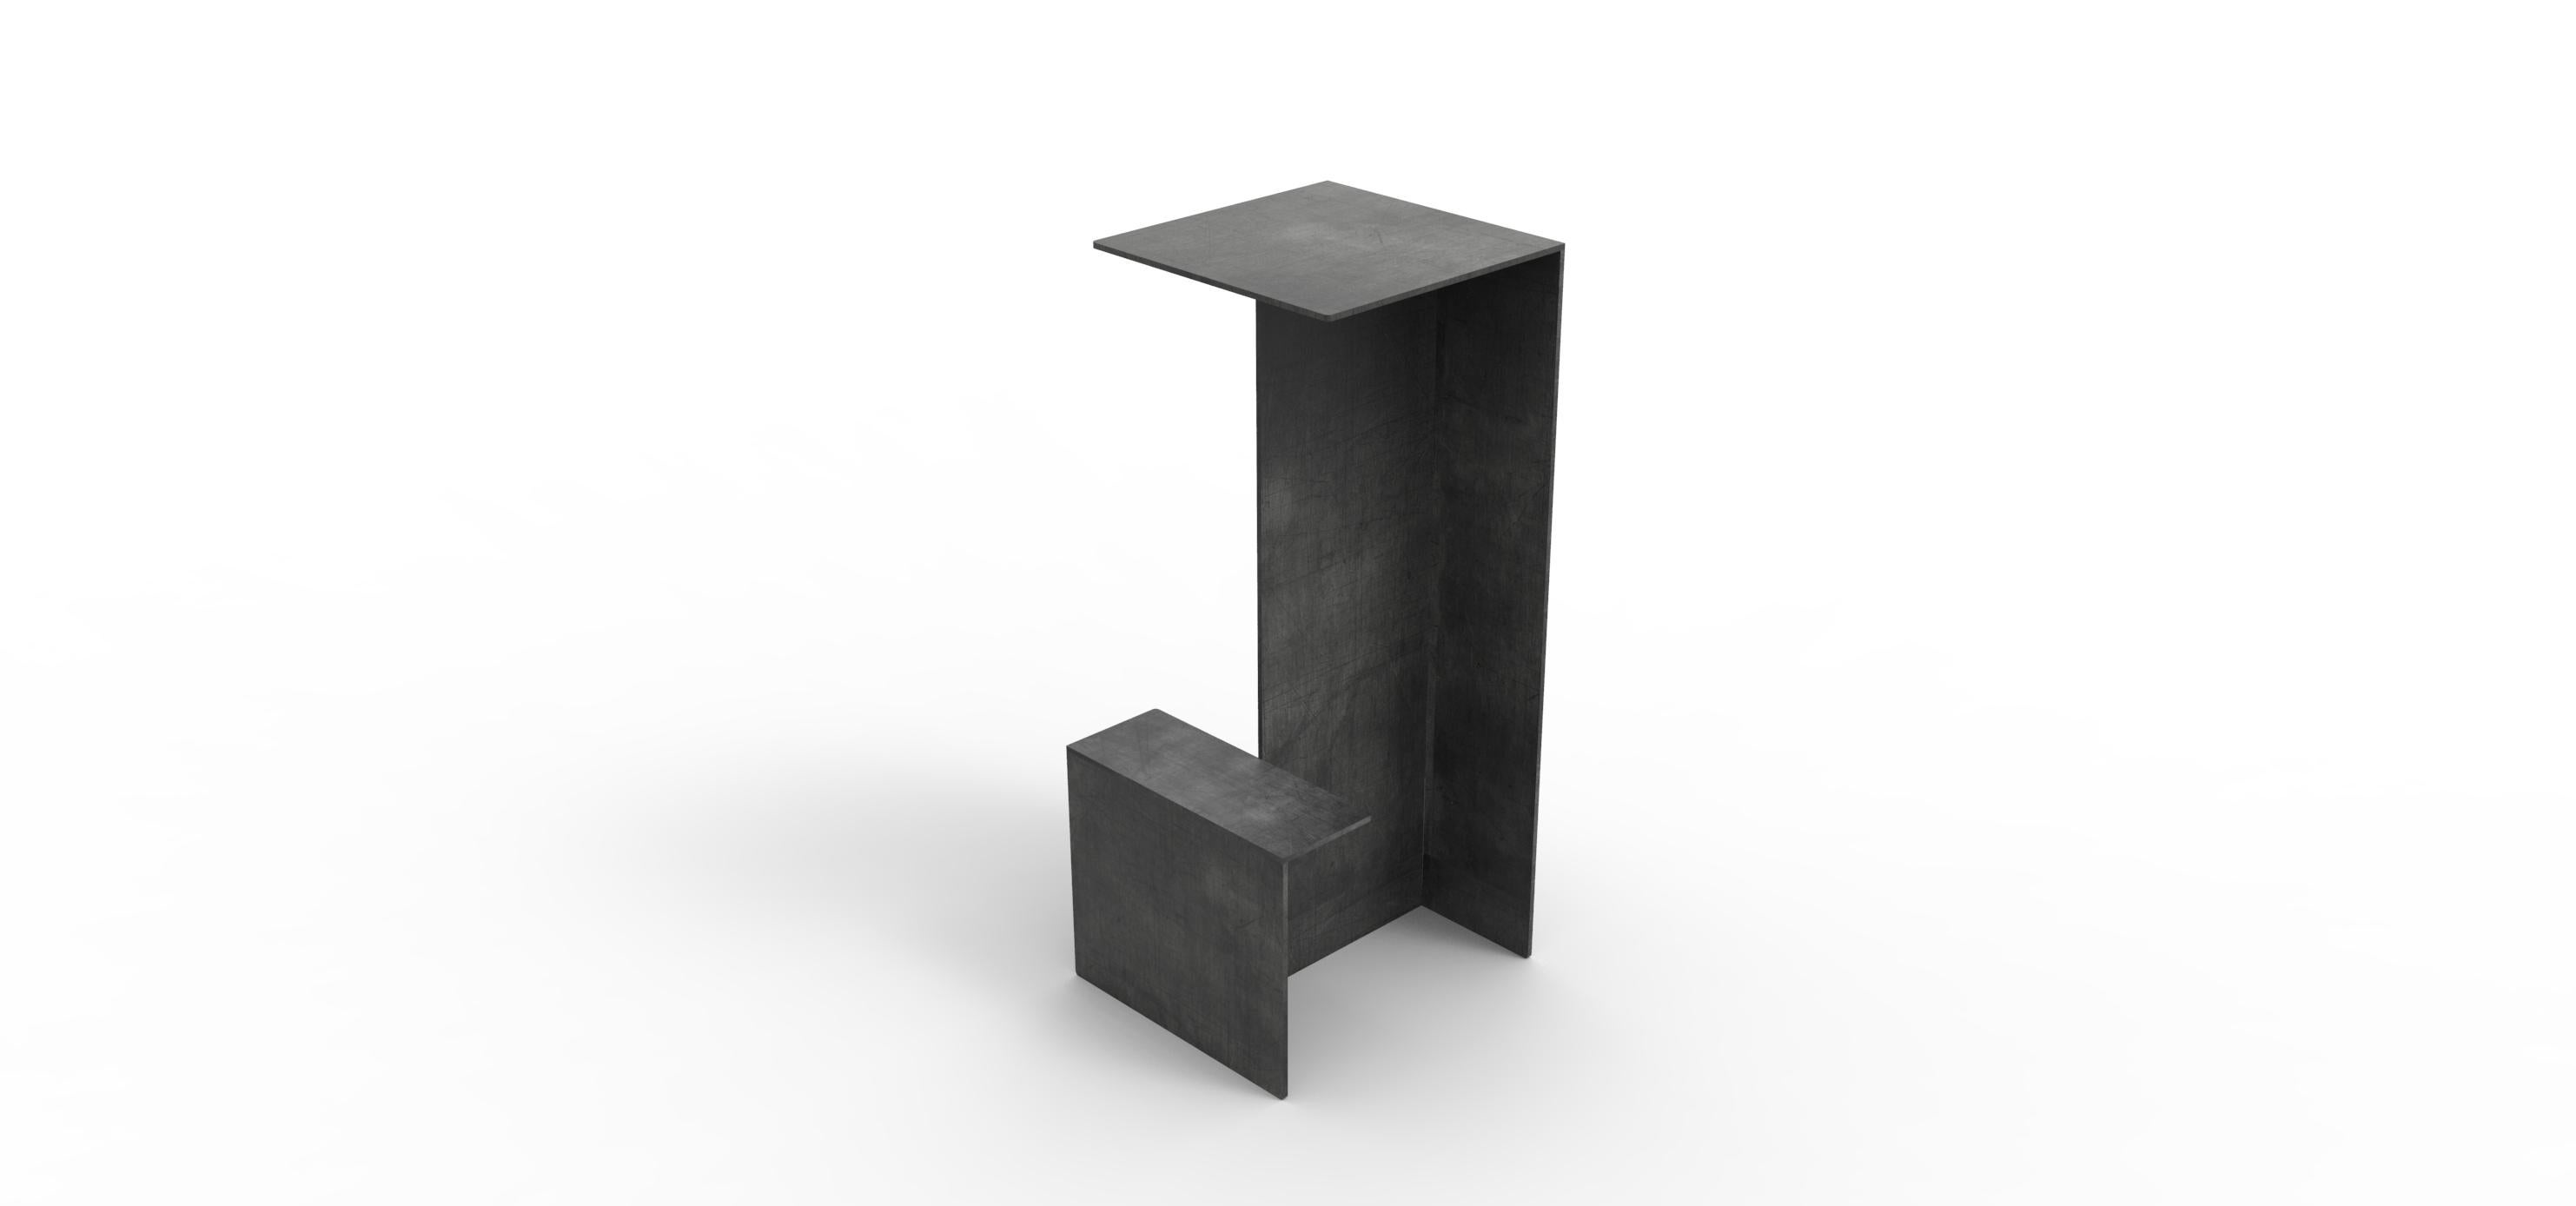 I stool by Neil Nenner and Avihai Mizrahi 
Objects 
Dimensions: H 70 x L 35 x W 32 cm
Materials: Iron

Avihai Mizrahi (b. 1979, Jerusalem), Independent designer / Artist and lecturer in visual communication, holds a B.des in visual